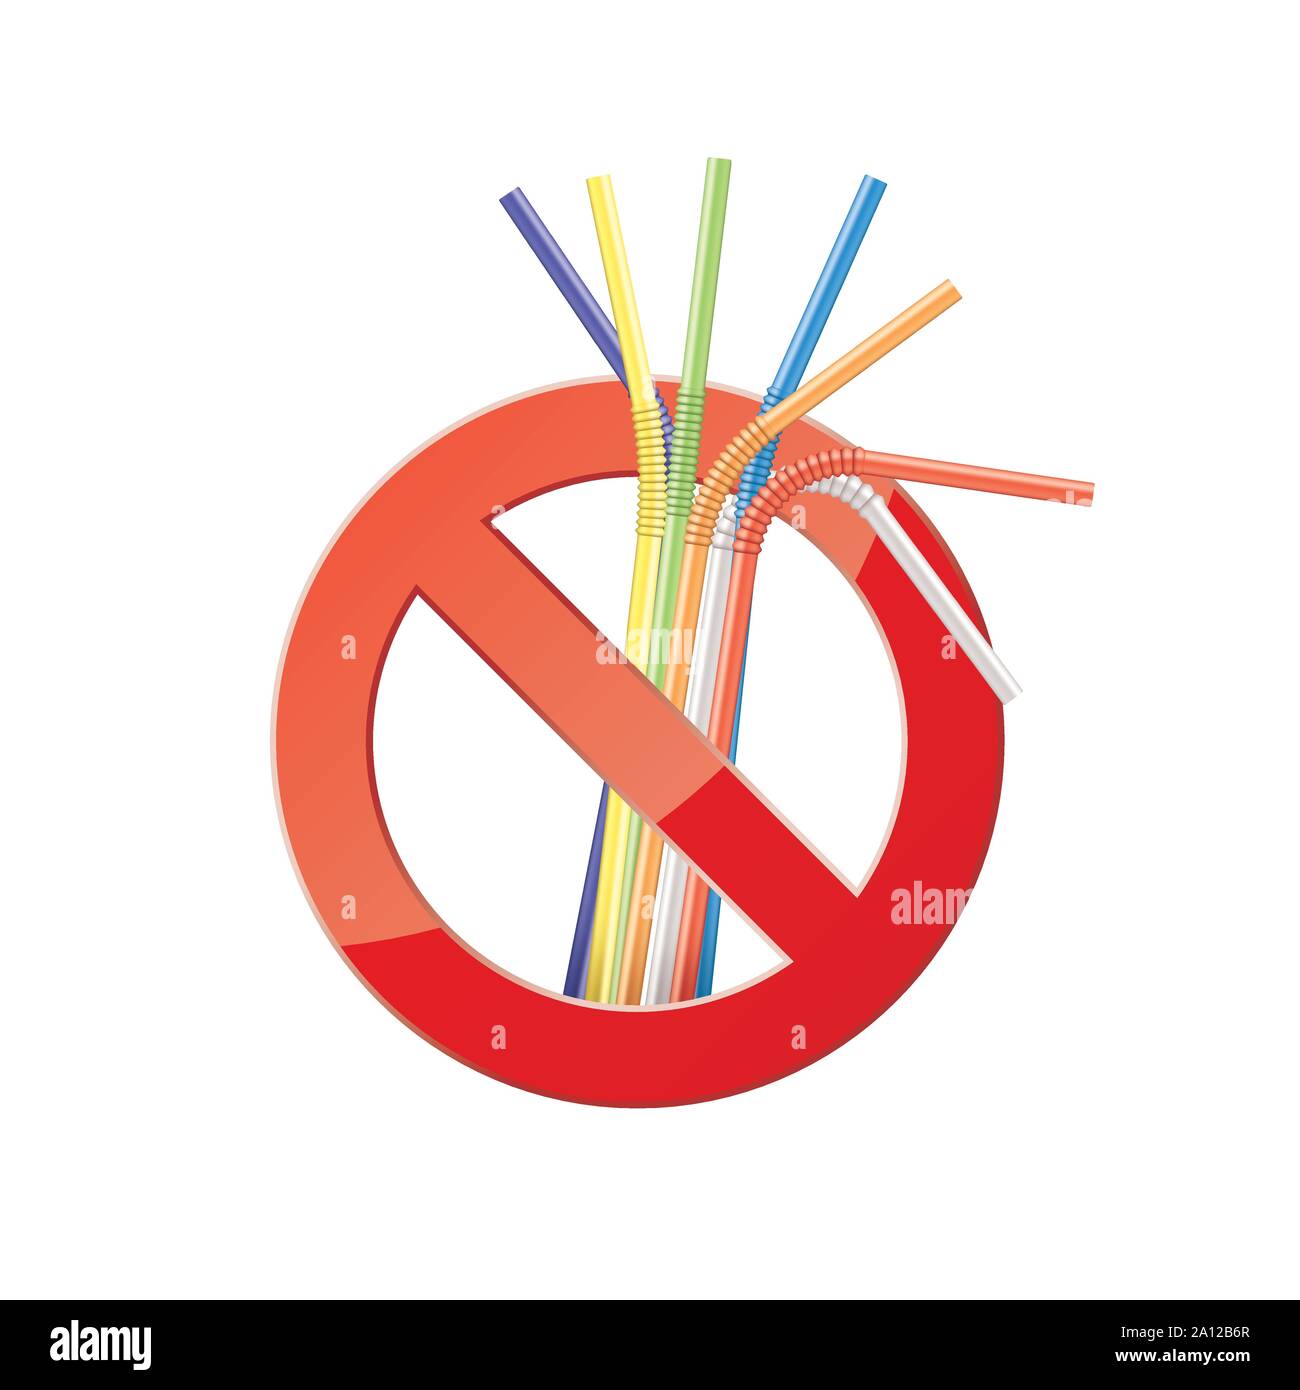 No Plastic Straws. Save environment banner. Protect nature icon. Vector illustration isolated on white background Stock Vector